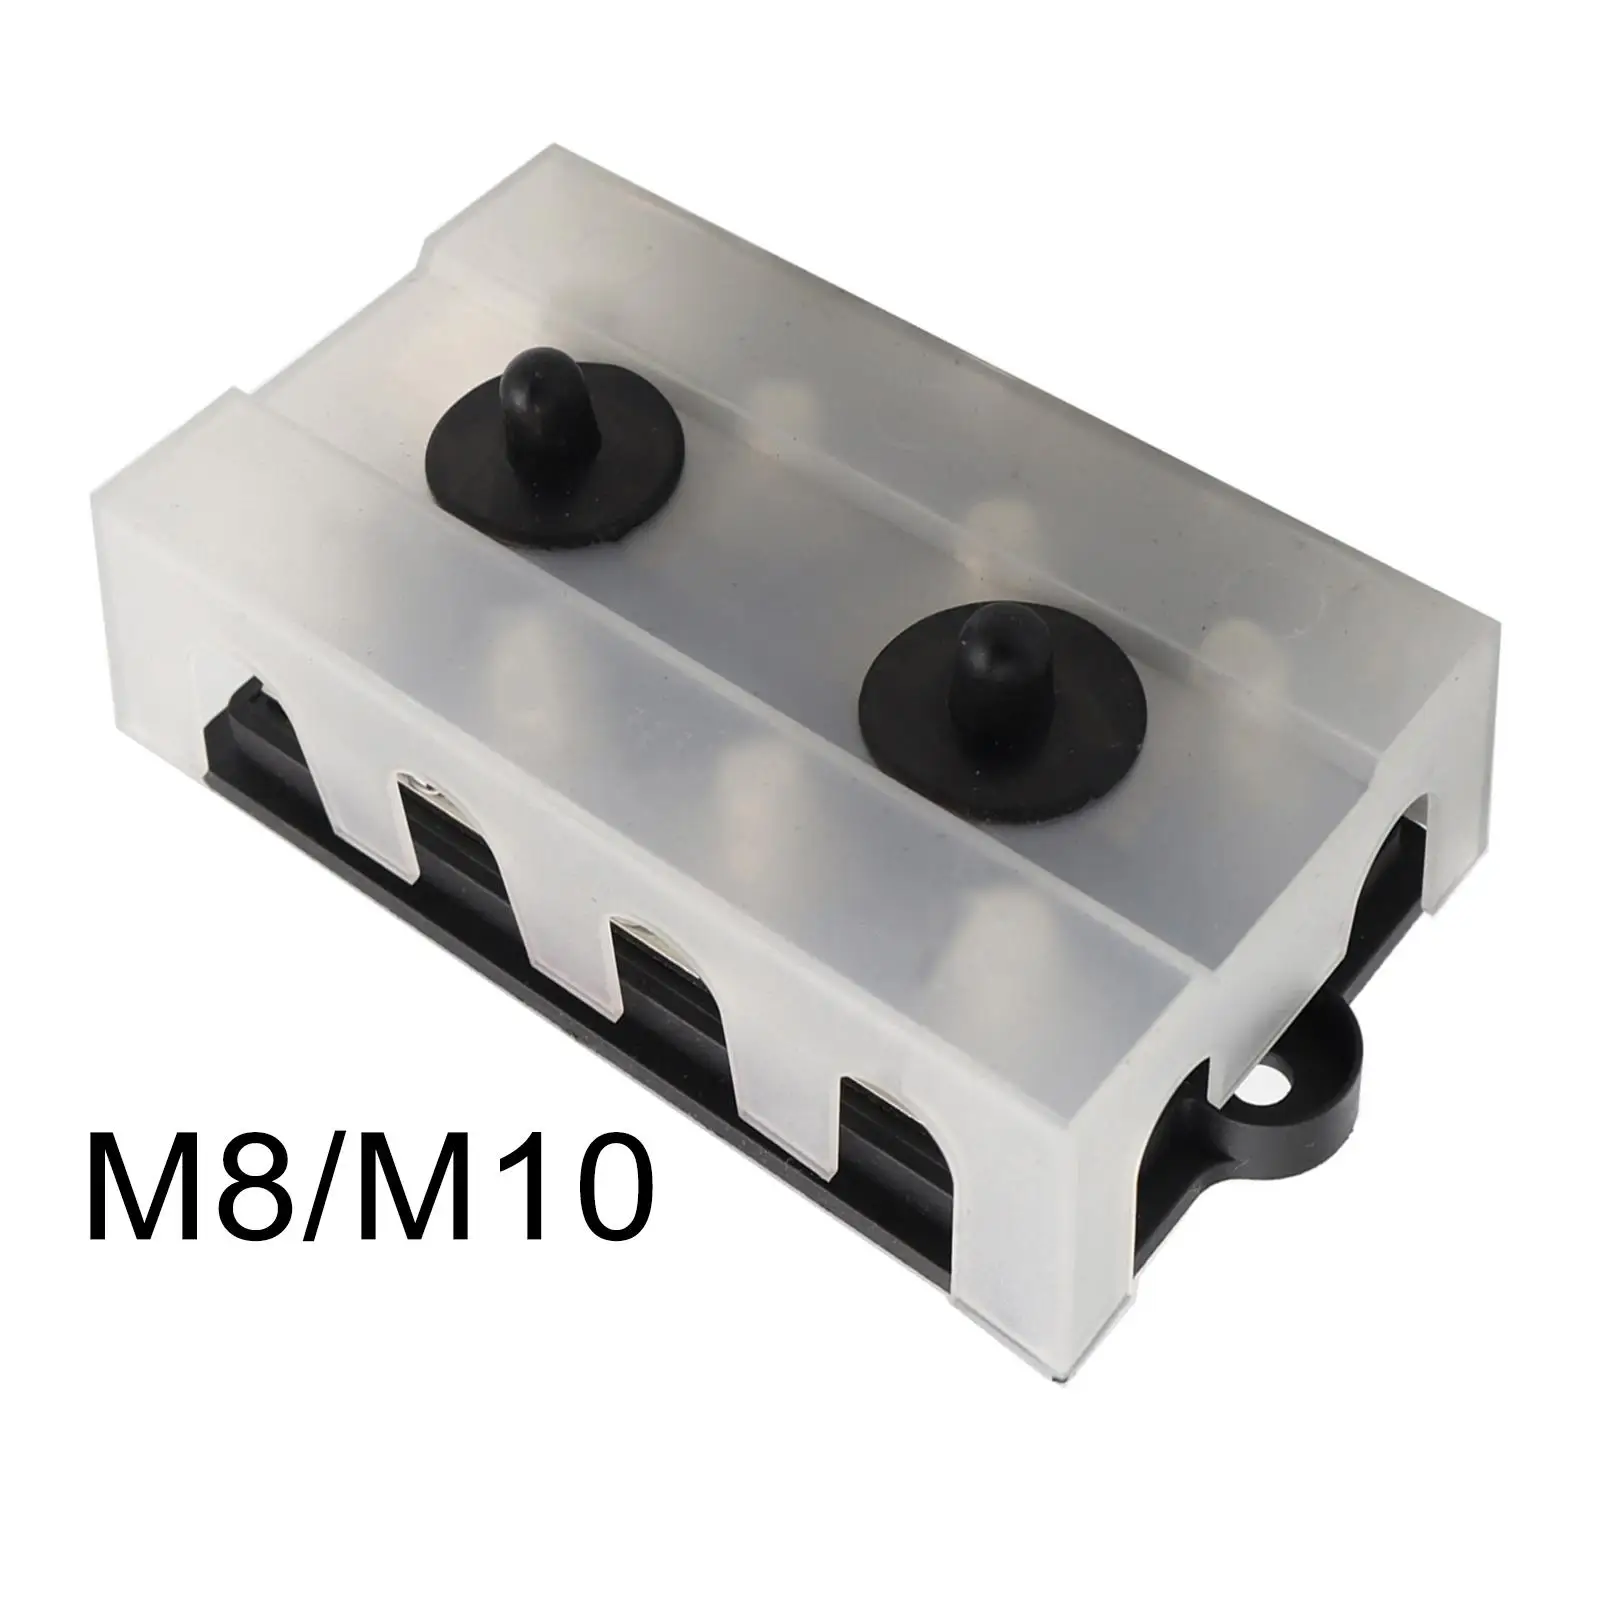 Power Distribution Block  with Cover Heavy Duty 48V 150 Amp Bus Bar Busbar for Boat Trailer Car Vehicles RV